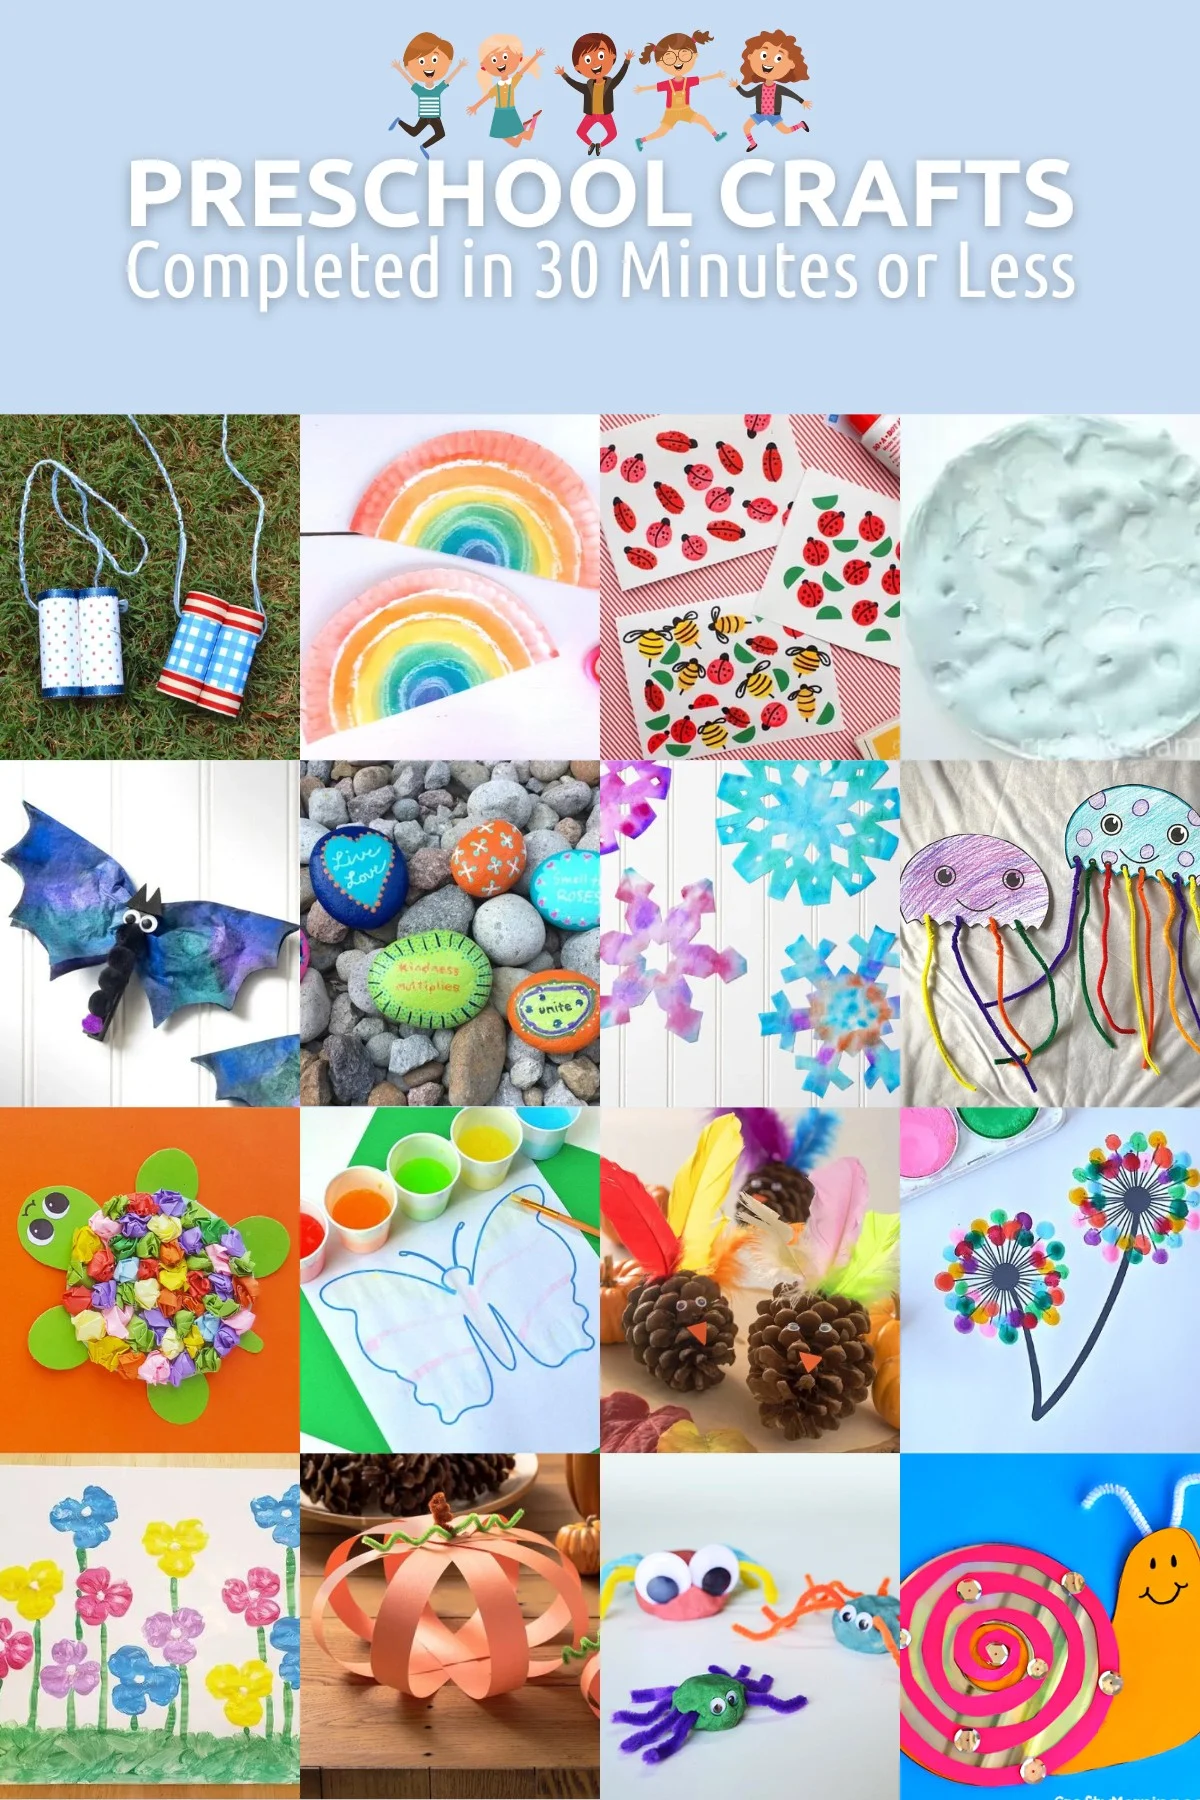 20+ Fun Finger Painting Ideas & Crafts For Kids